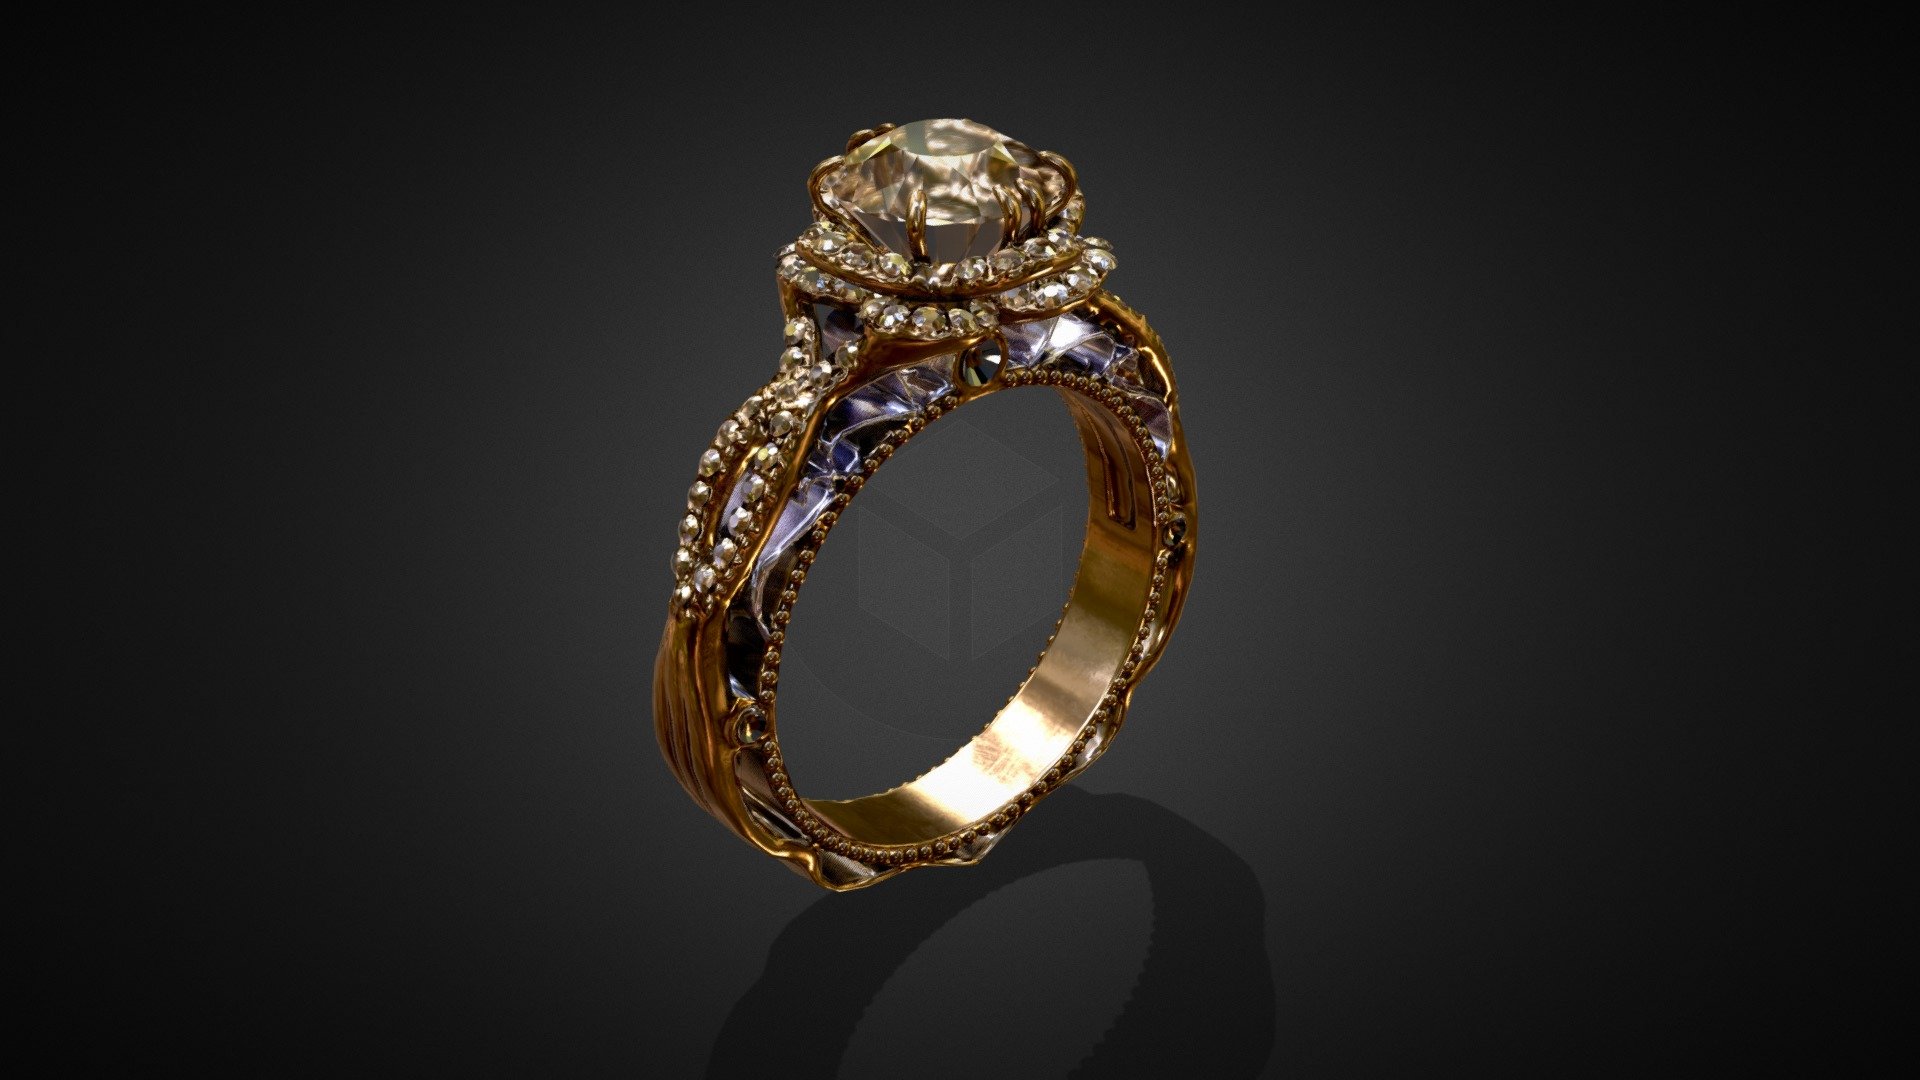 Ring Venetian Collection is a low-poly 3d model ready for Virtual Reality (VR)

SPECS




Model is set of separated Objects easy to custom and Distraction ready

Model Has real-world Scale and is centered at 0,0,0,

All textures Optimized 4K

Mesh file Optimized fbx 

Texture dimensions: - 4k (Full PBR Metallic set )
 - Venetian Ring VR - Buy Royalty Free 3D model by Mass (@masood3d) 3d model